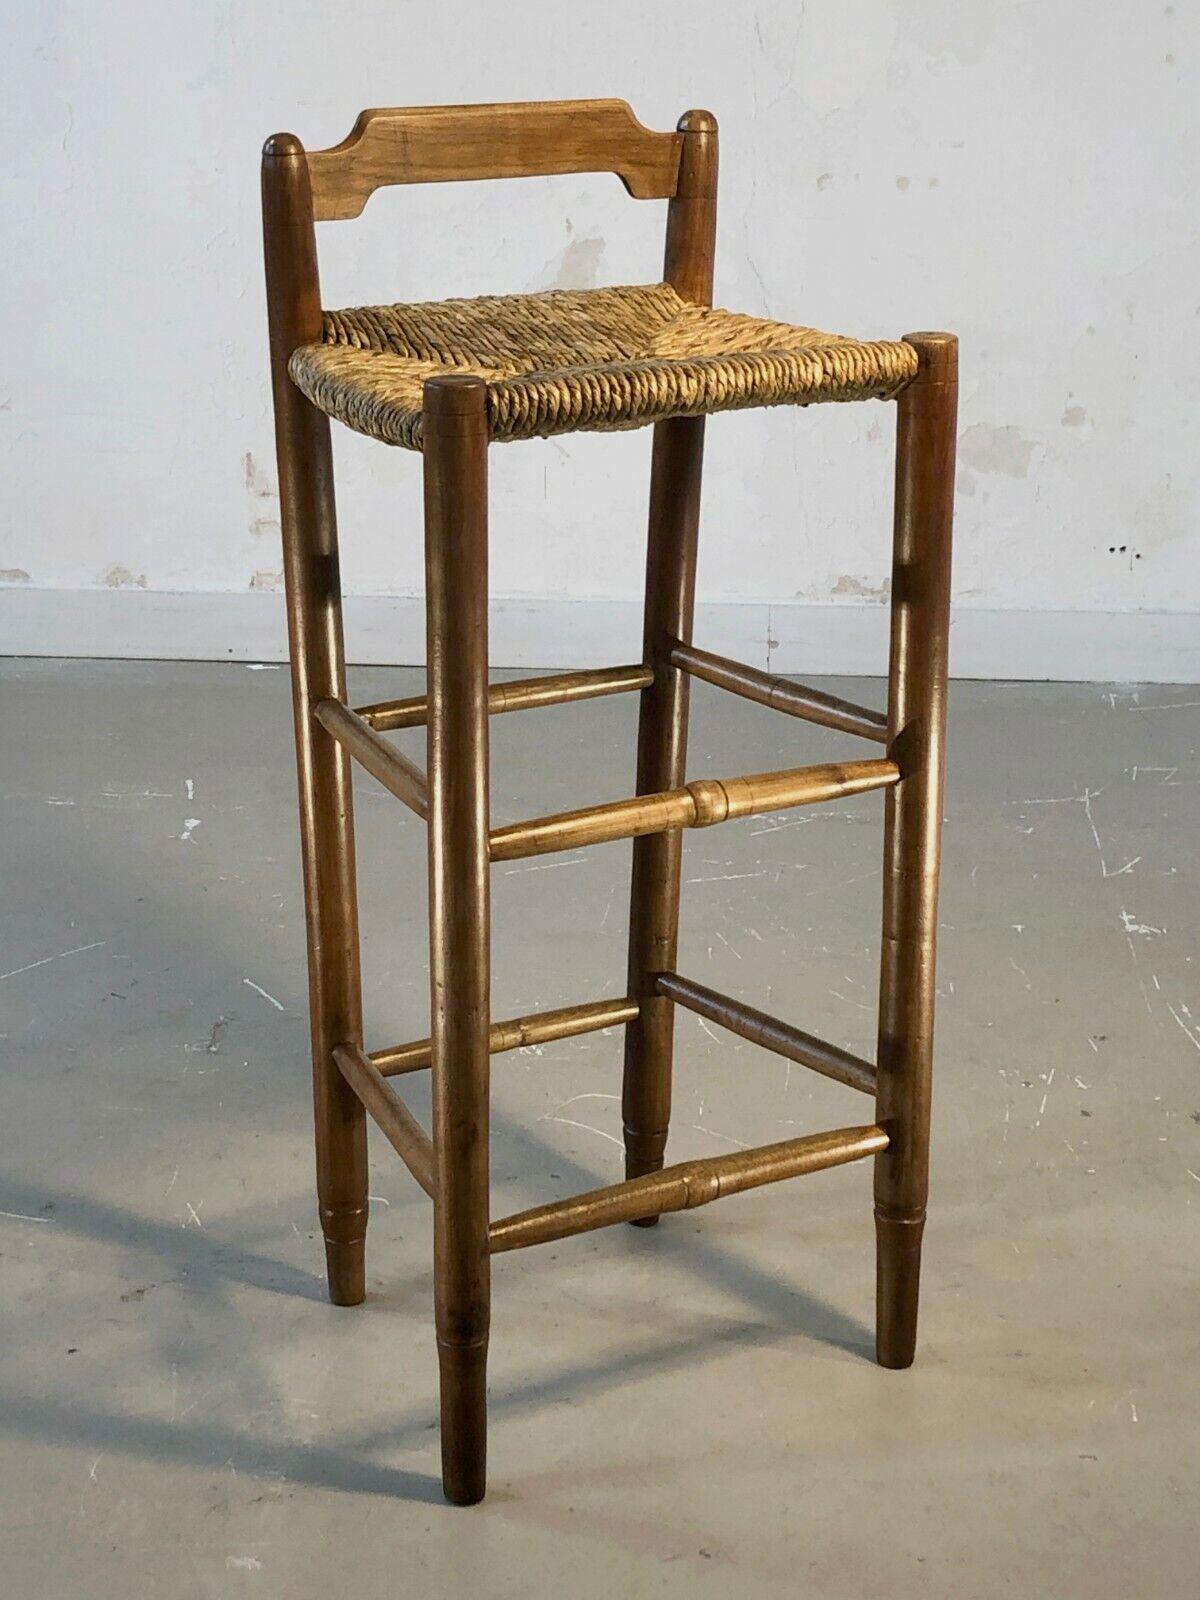 A BRUTALIST MID-CENTURY-MODERN RUSTIC BAR STOOL CHAIR, France 1950 For Sale 4